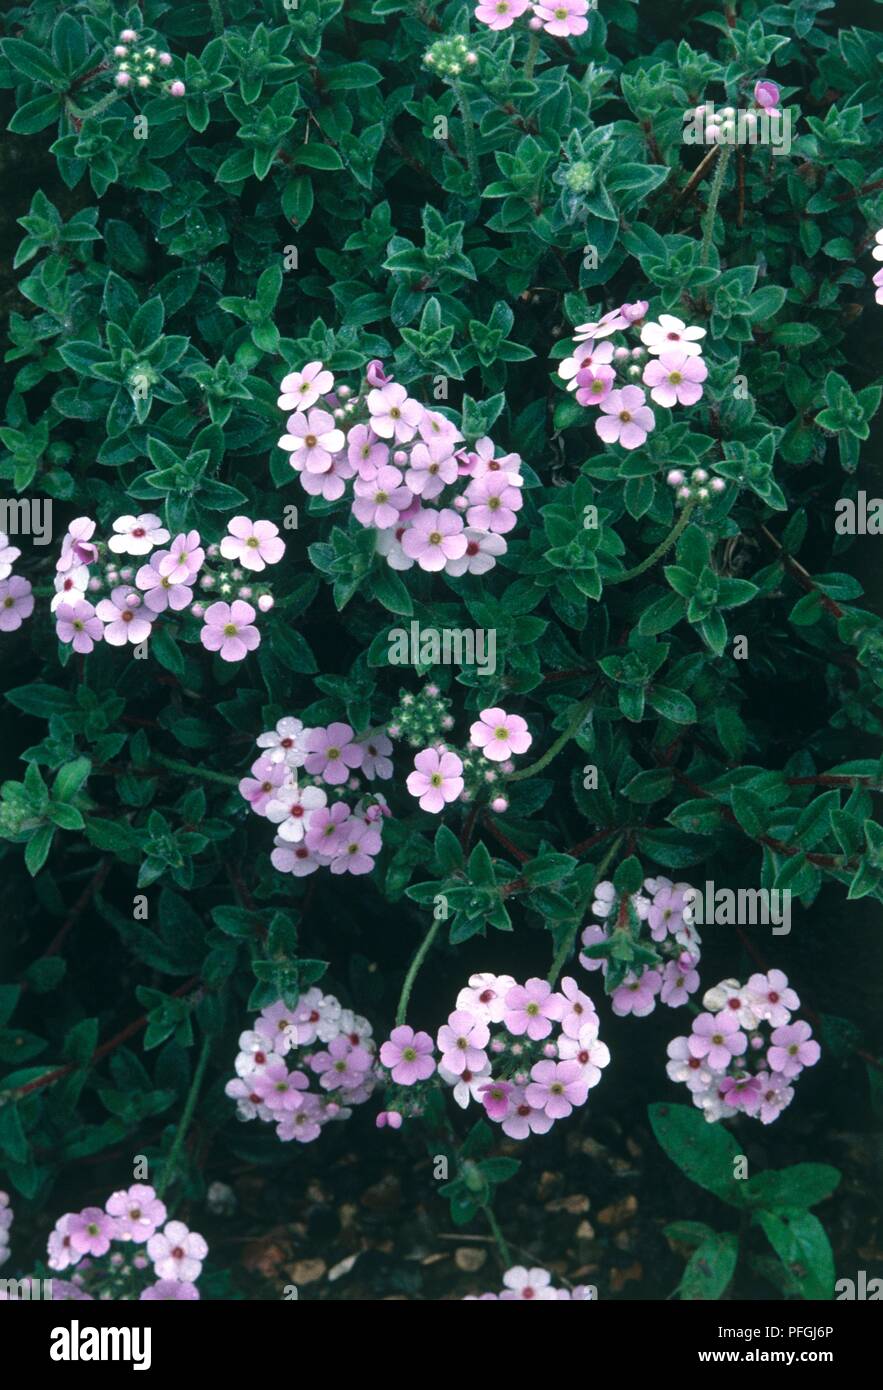 Androsace lanuginosa (Rock Jasmine) with umbels of pink flowers and elliptical green leaves Stock Photo